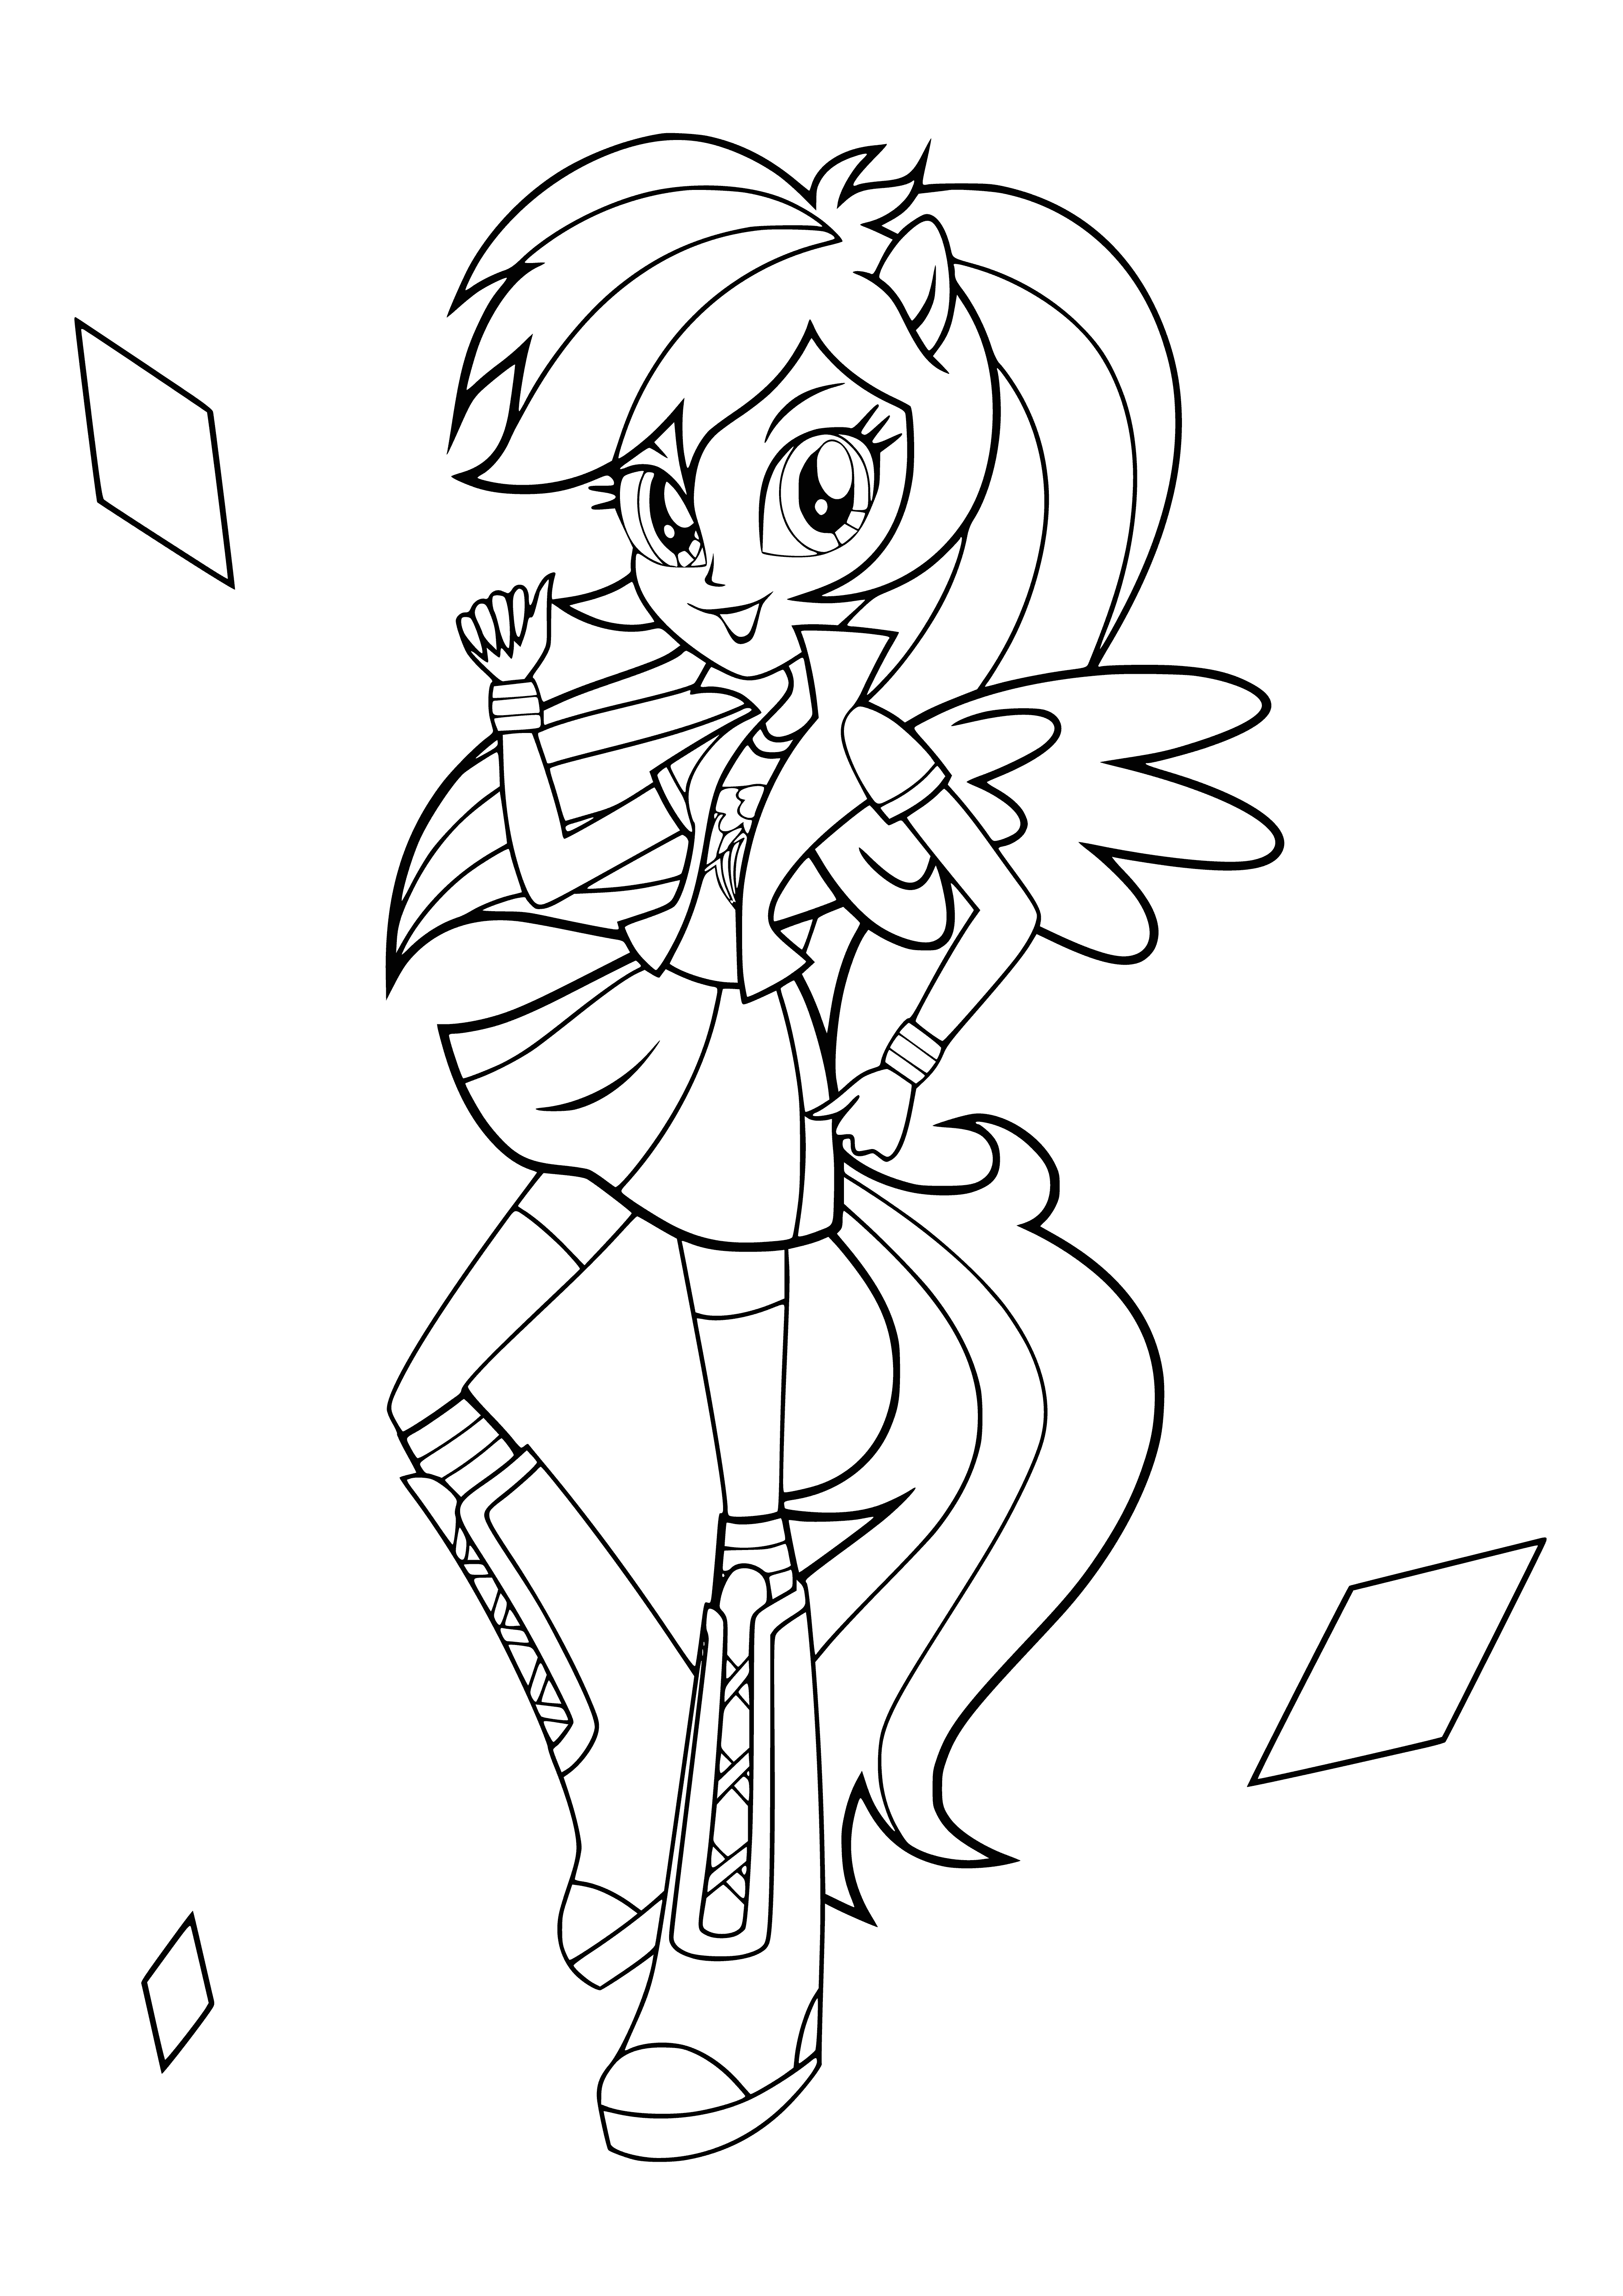 coloring page: Rainbow Dash is an eternally cheerful blue horse with a rainbow mane/tail, white stomach, & a fetching smile - one of the main characters in Equestria Girls.